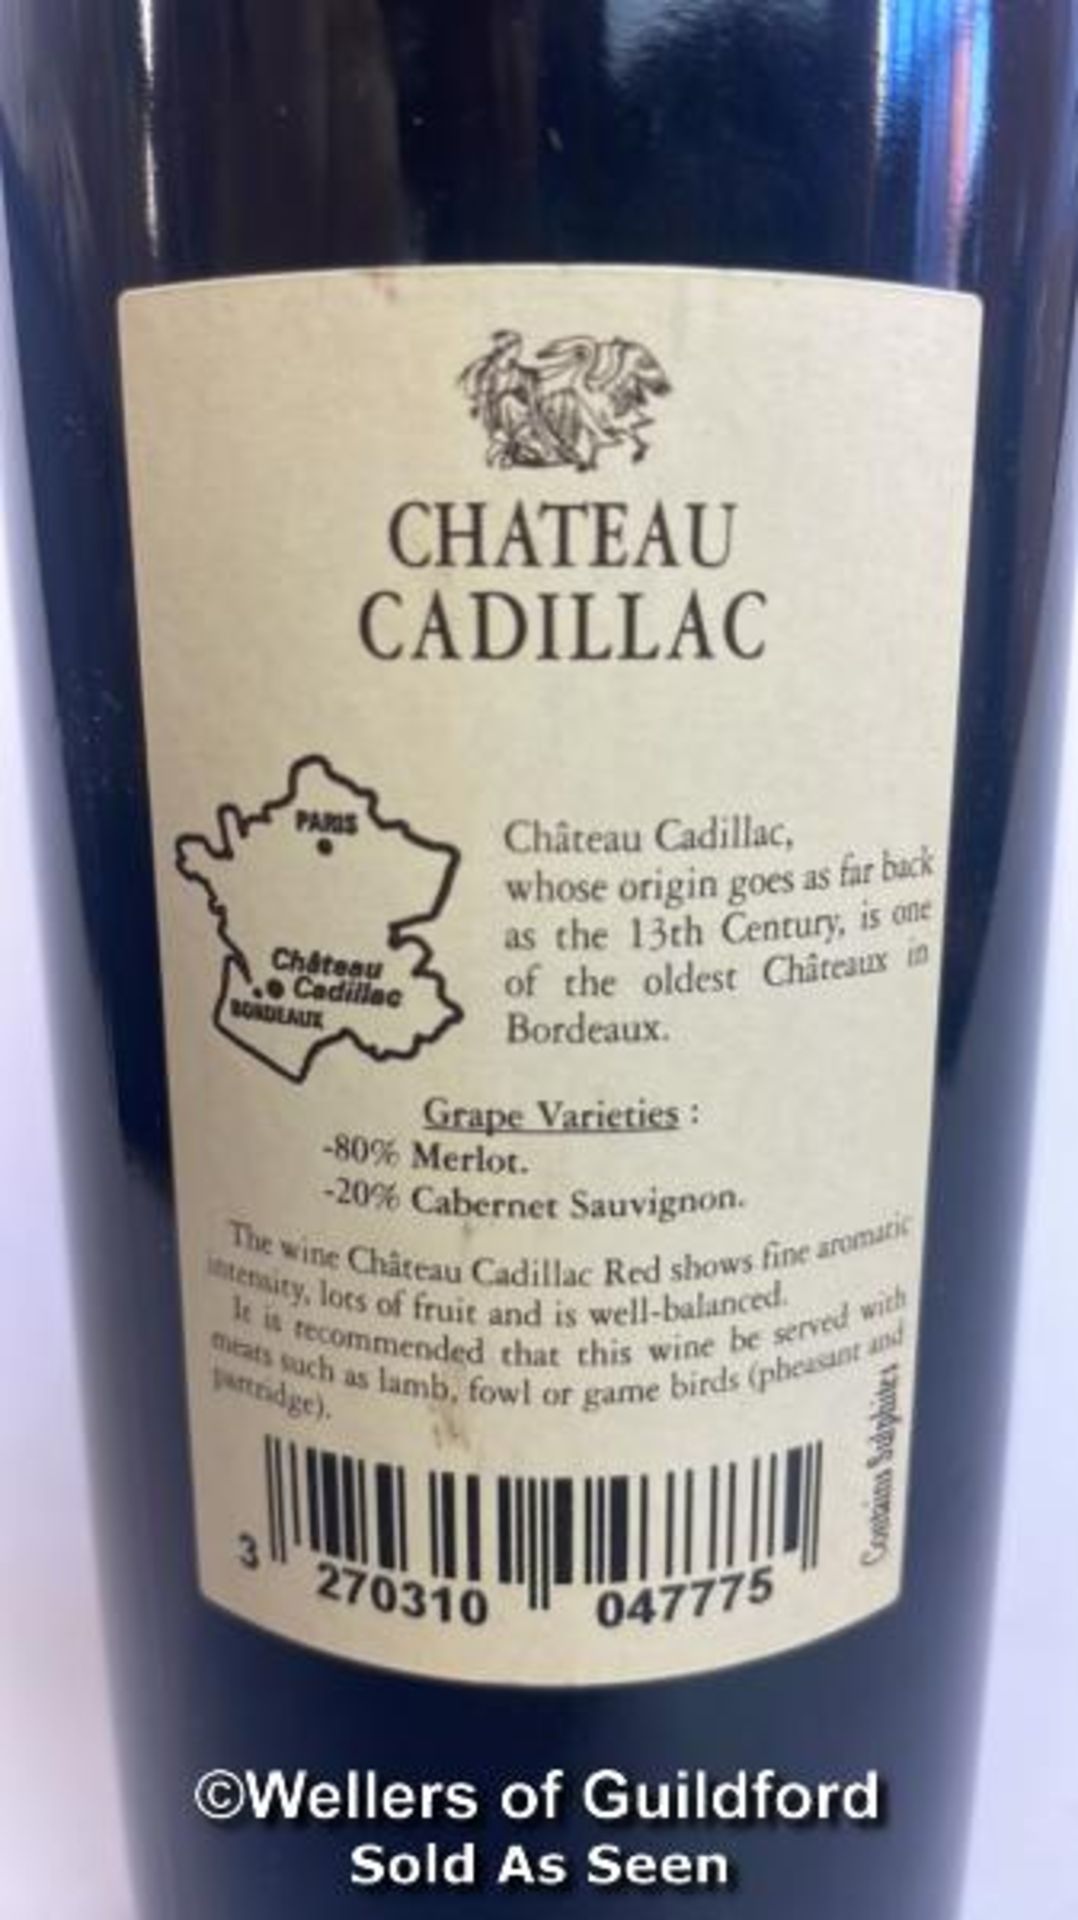 2003 Chateau Cadillac, Bordeaux Superieur, 75cl, 12% vol / Please see images for fill level and - Image 6 of 6